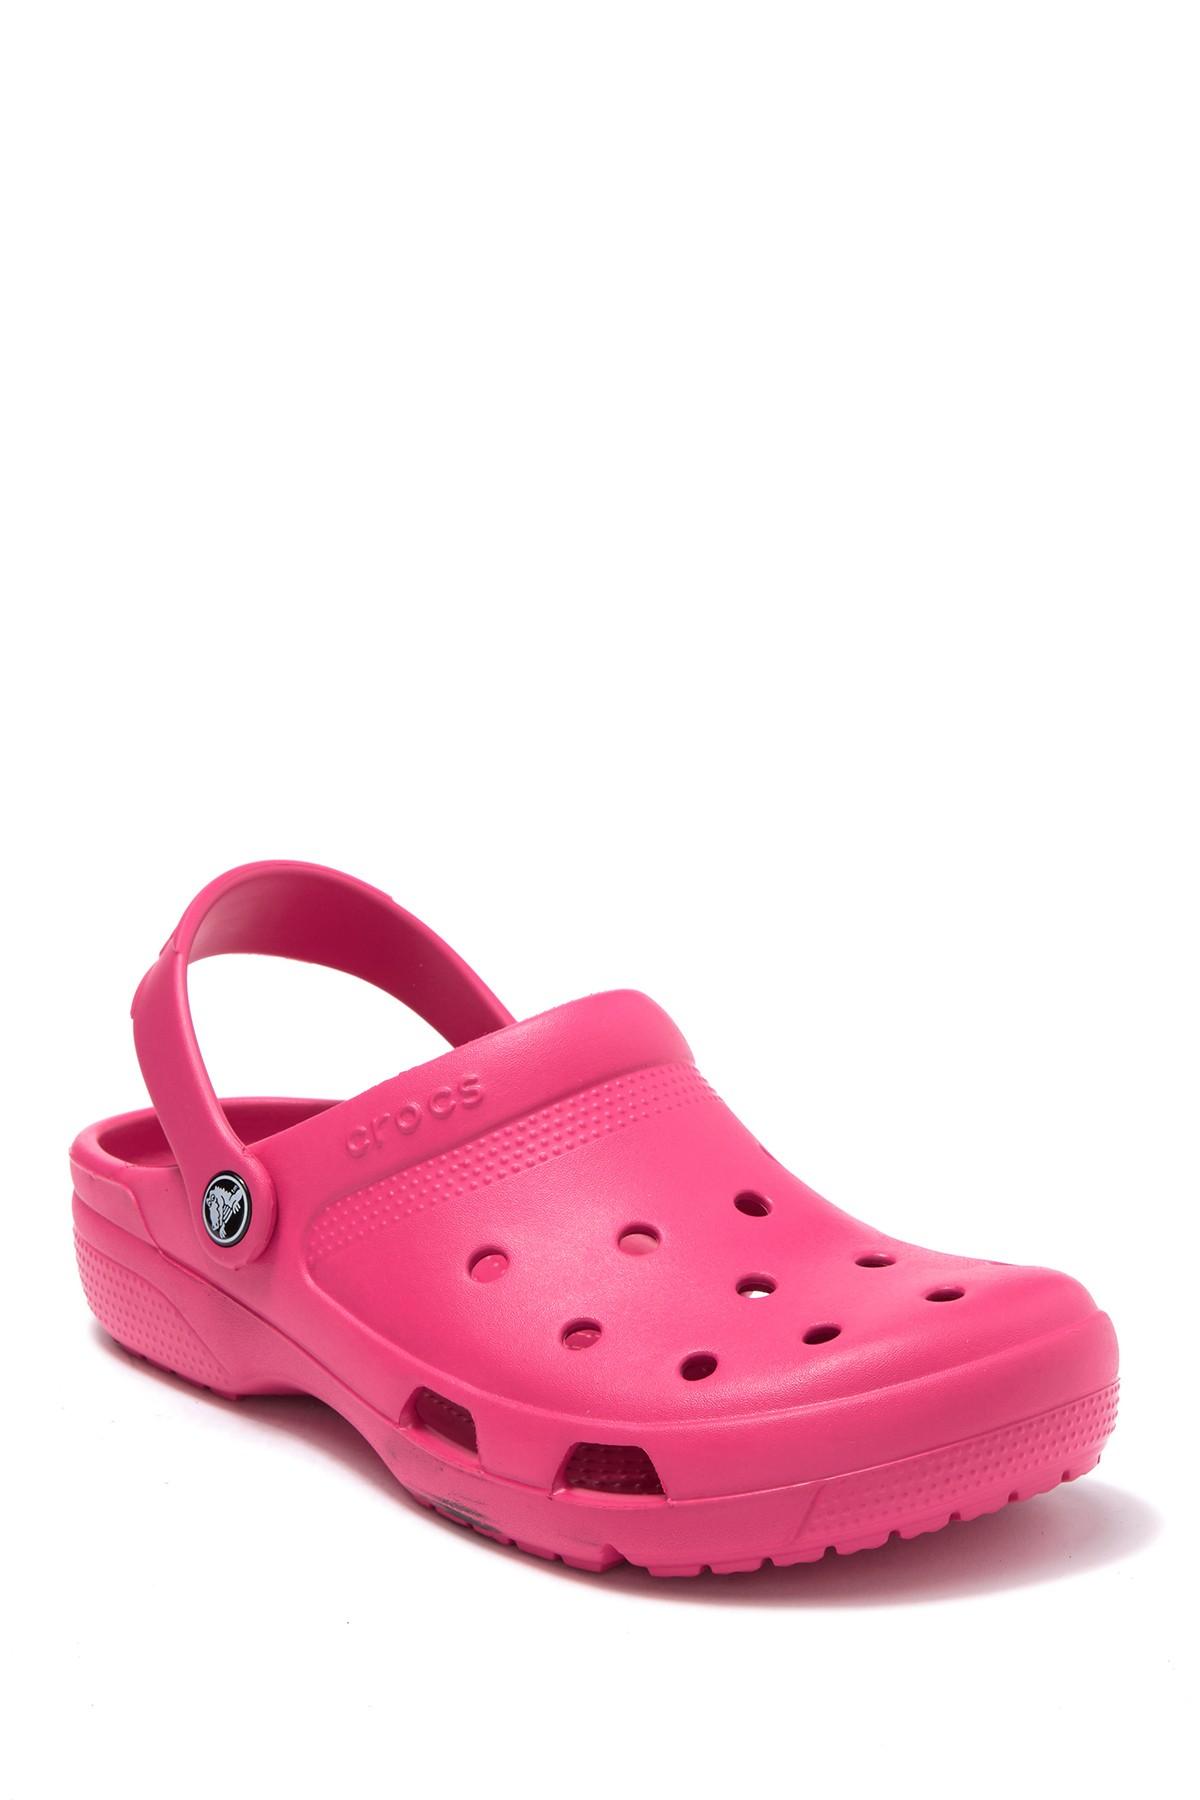 Crocs™ Canvas Coast Perforated Clog in Pink - Save 3% - Lyst